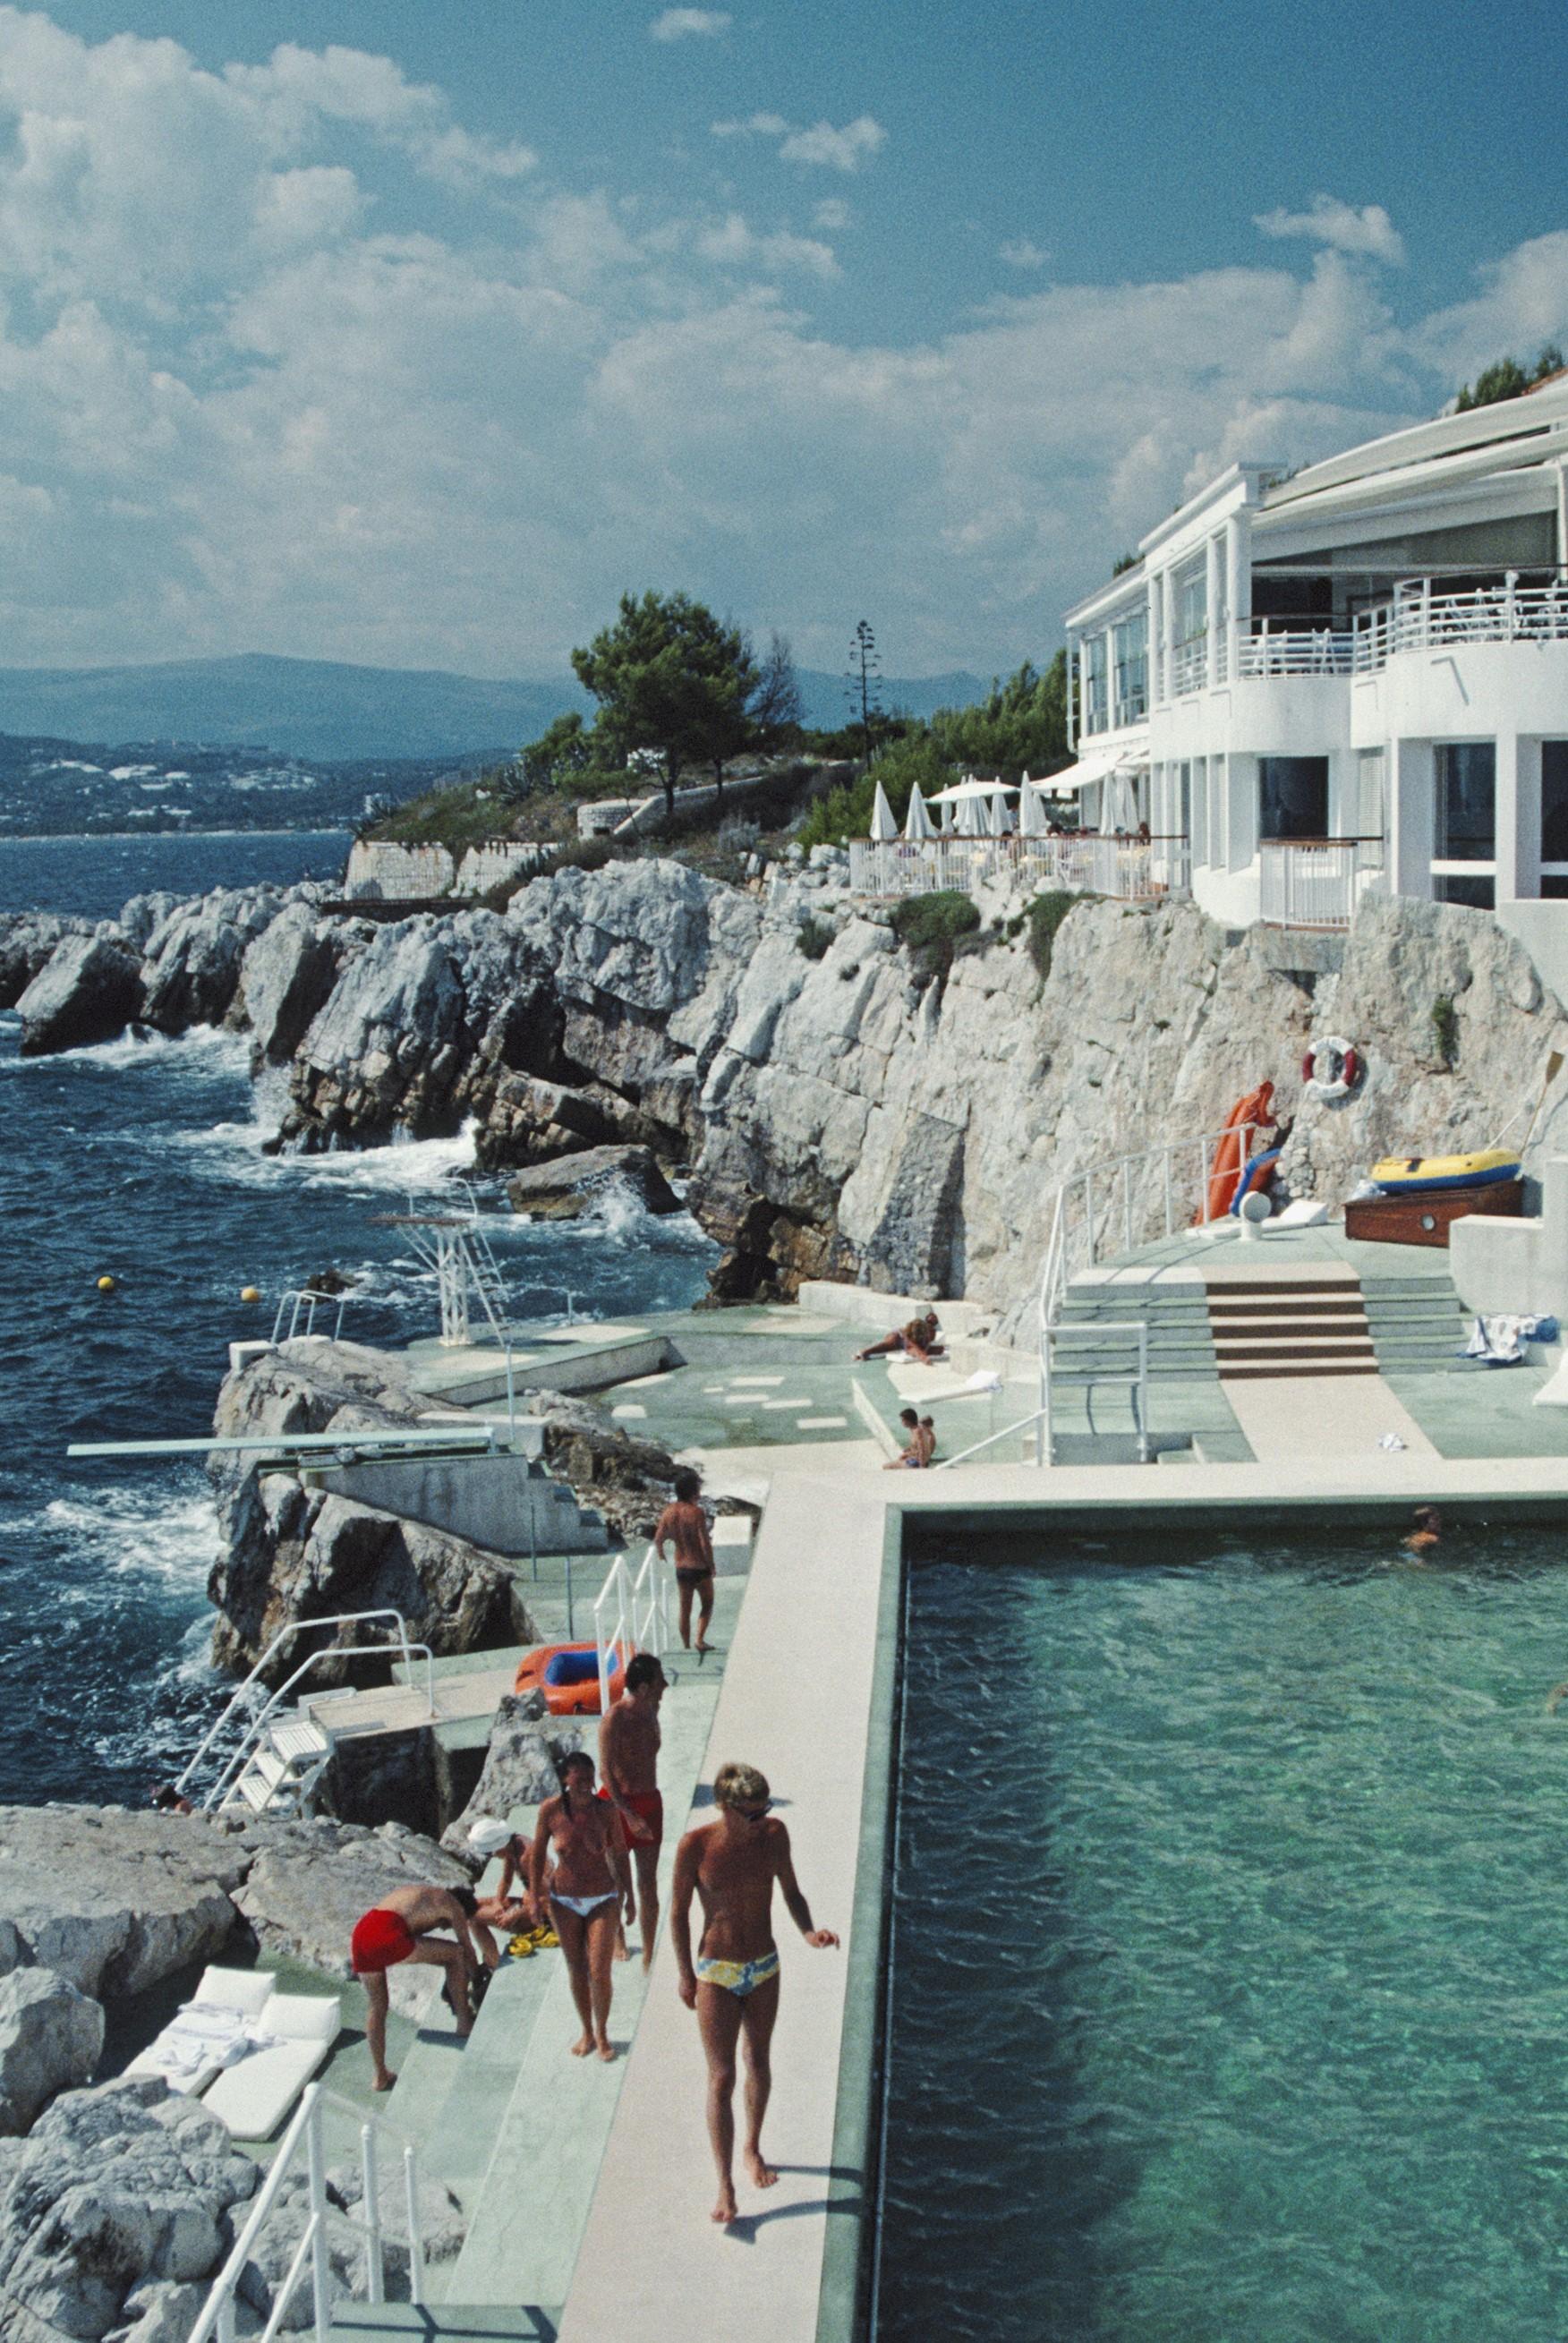 For a limited time only these Slim Aarons prints are available to purchase at 15% discount. Please contact the gallery for any queries.

Please bear in mind that all prints are produced to order. Lead times are expected between 15-20 days.
Currency